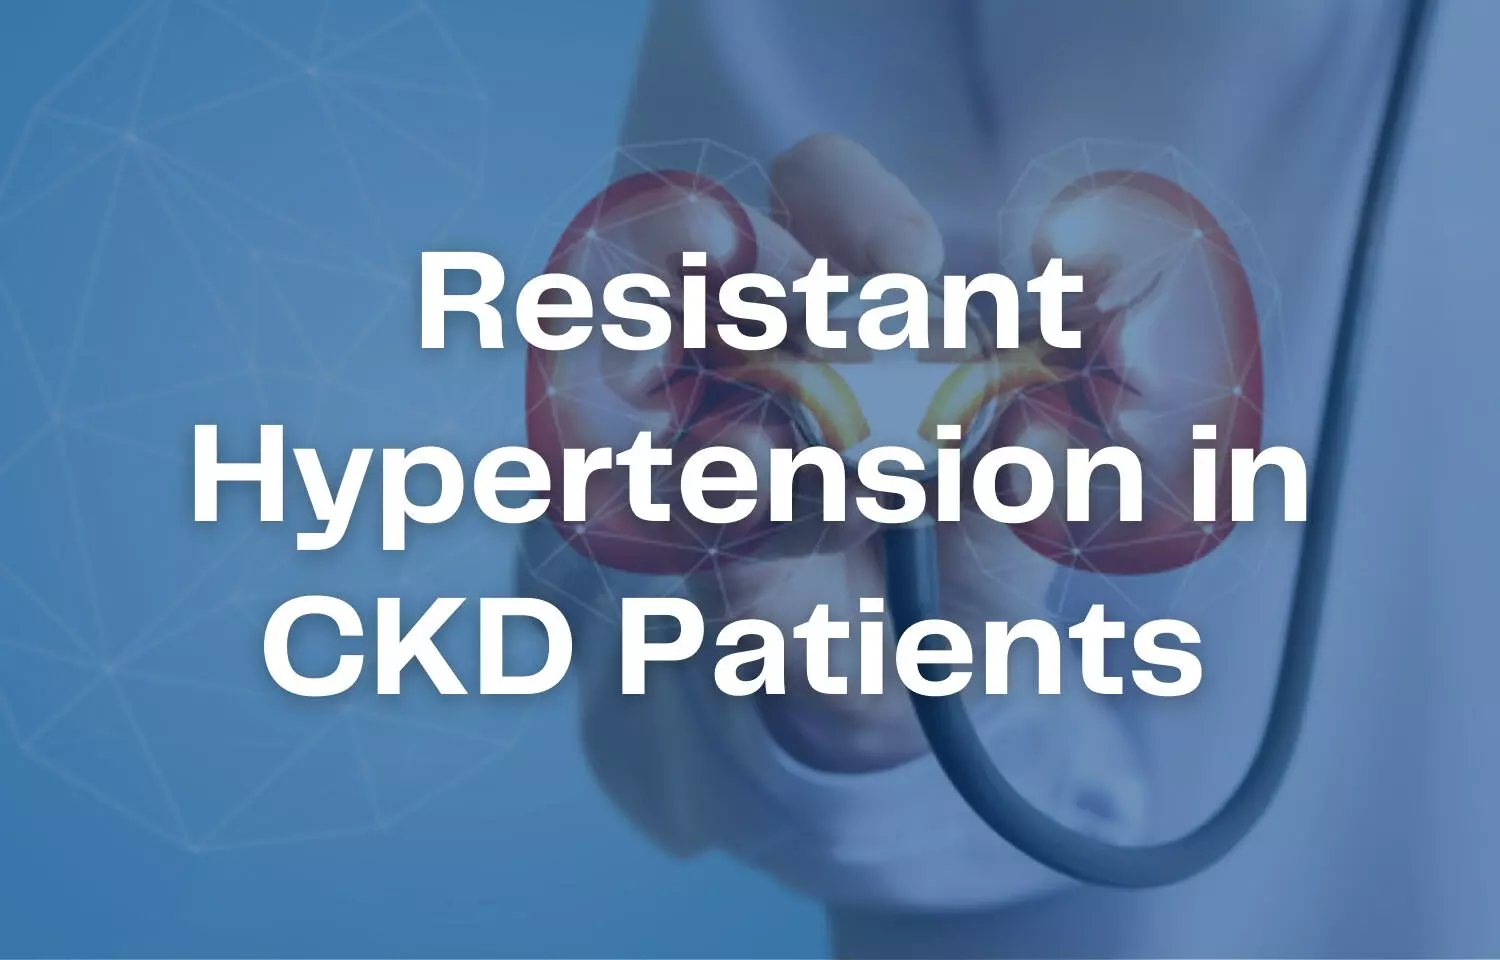 Treating Resistant Hypertension in CKD patients- A Double challenge for physicians